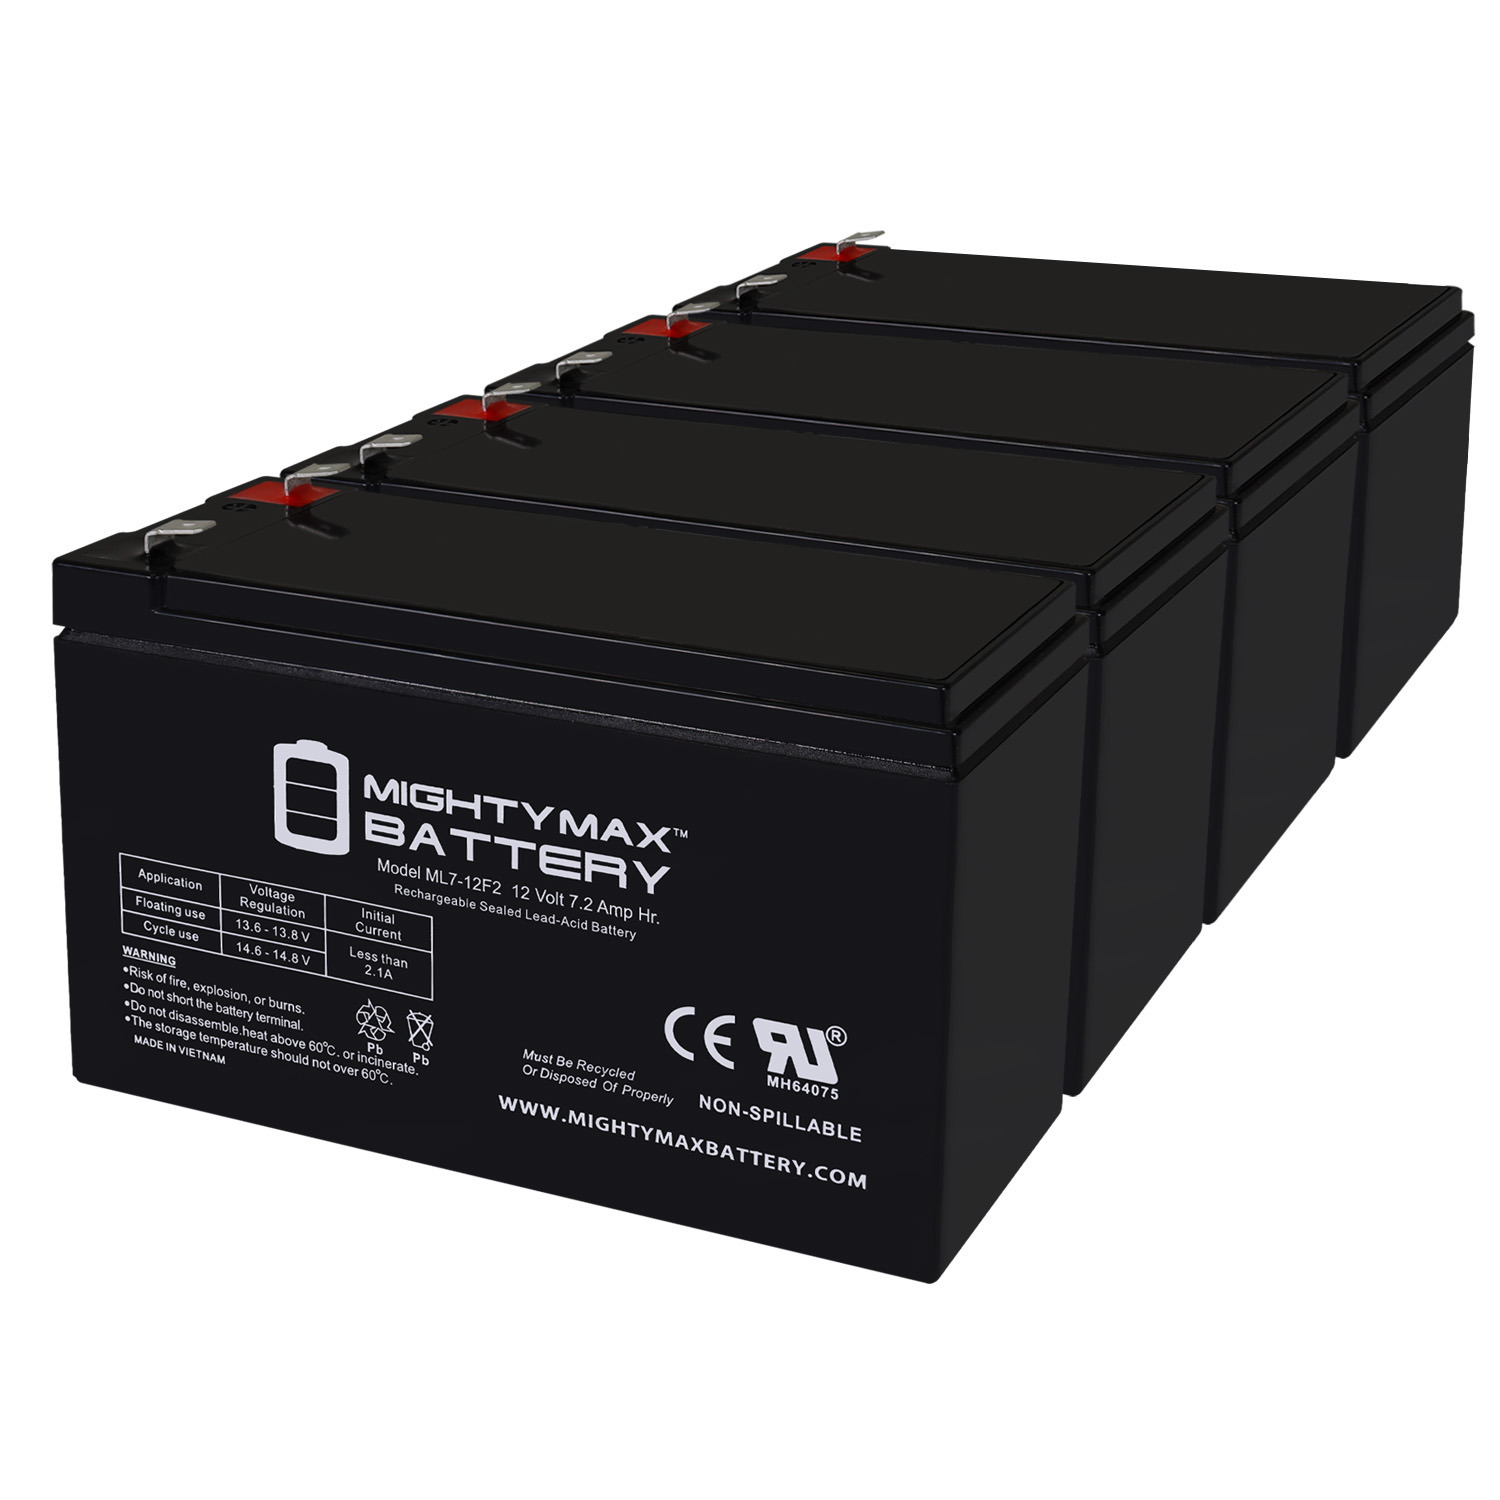 12V 7Ah F2 Replacement Battery for APC SU1400RMNET12 - 4 Pack